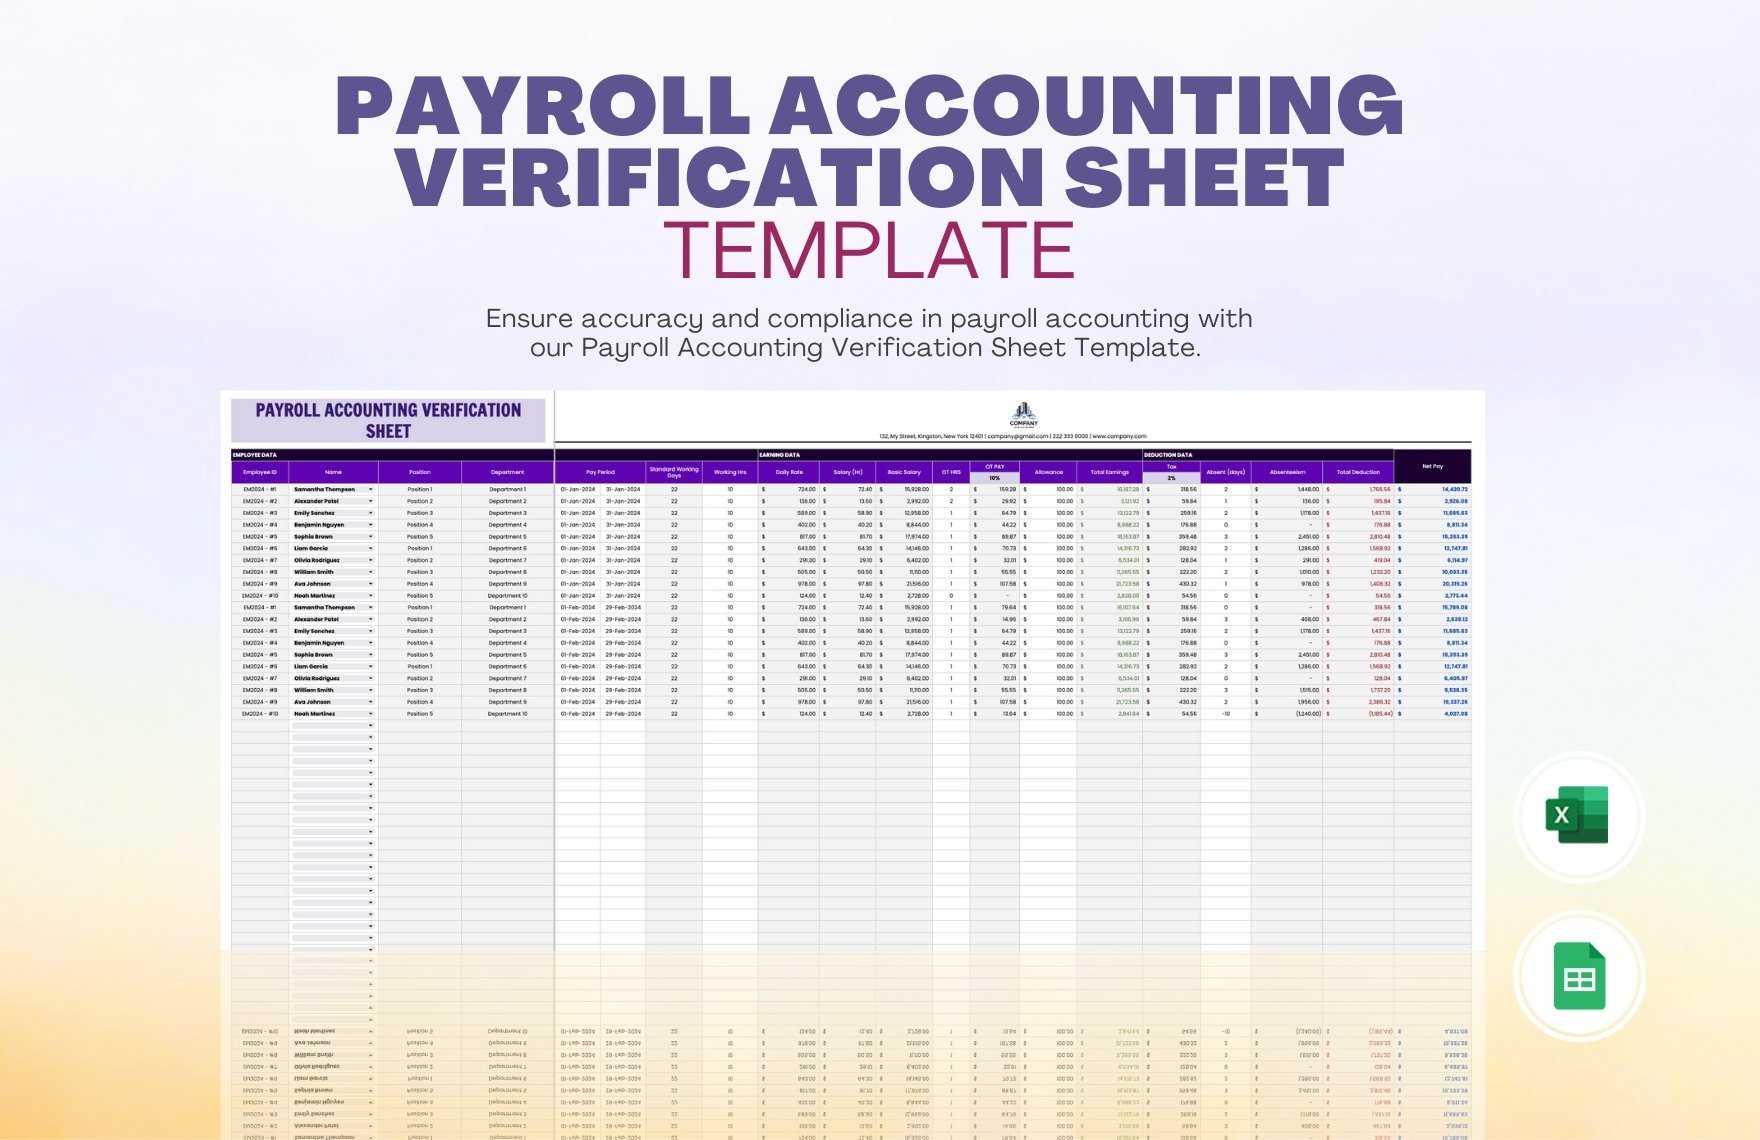 Payroll Accounting Verification Sheet Template in Excel, Google Sheets